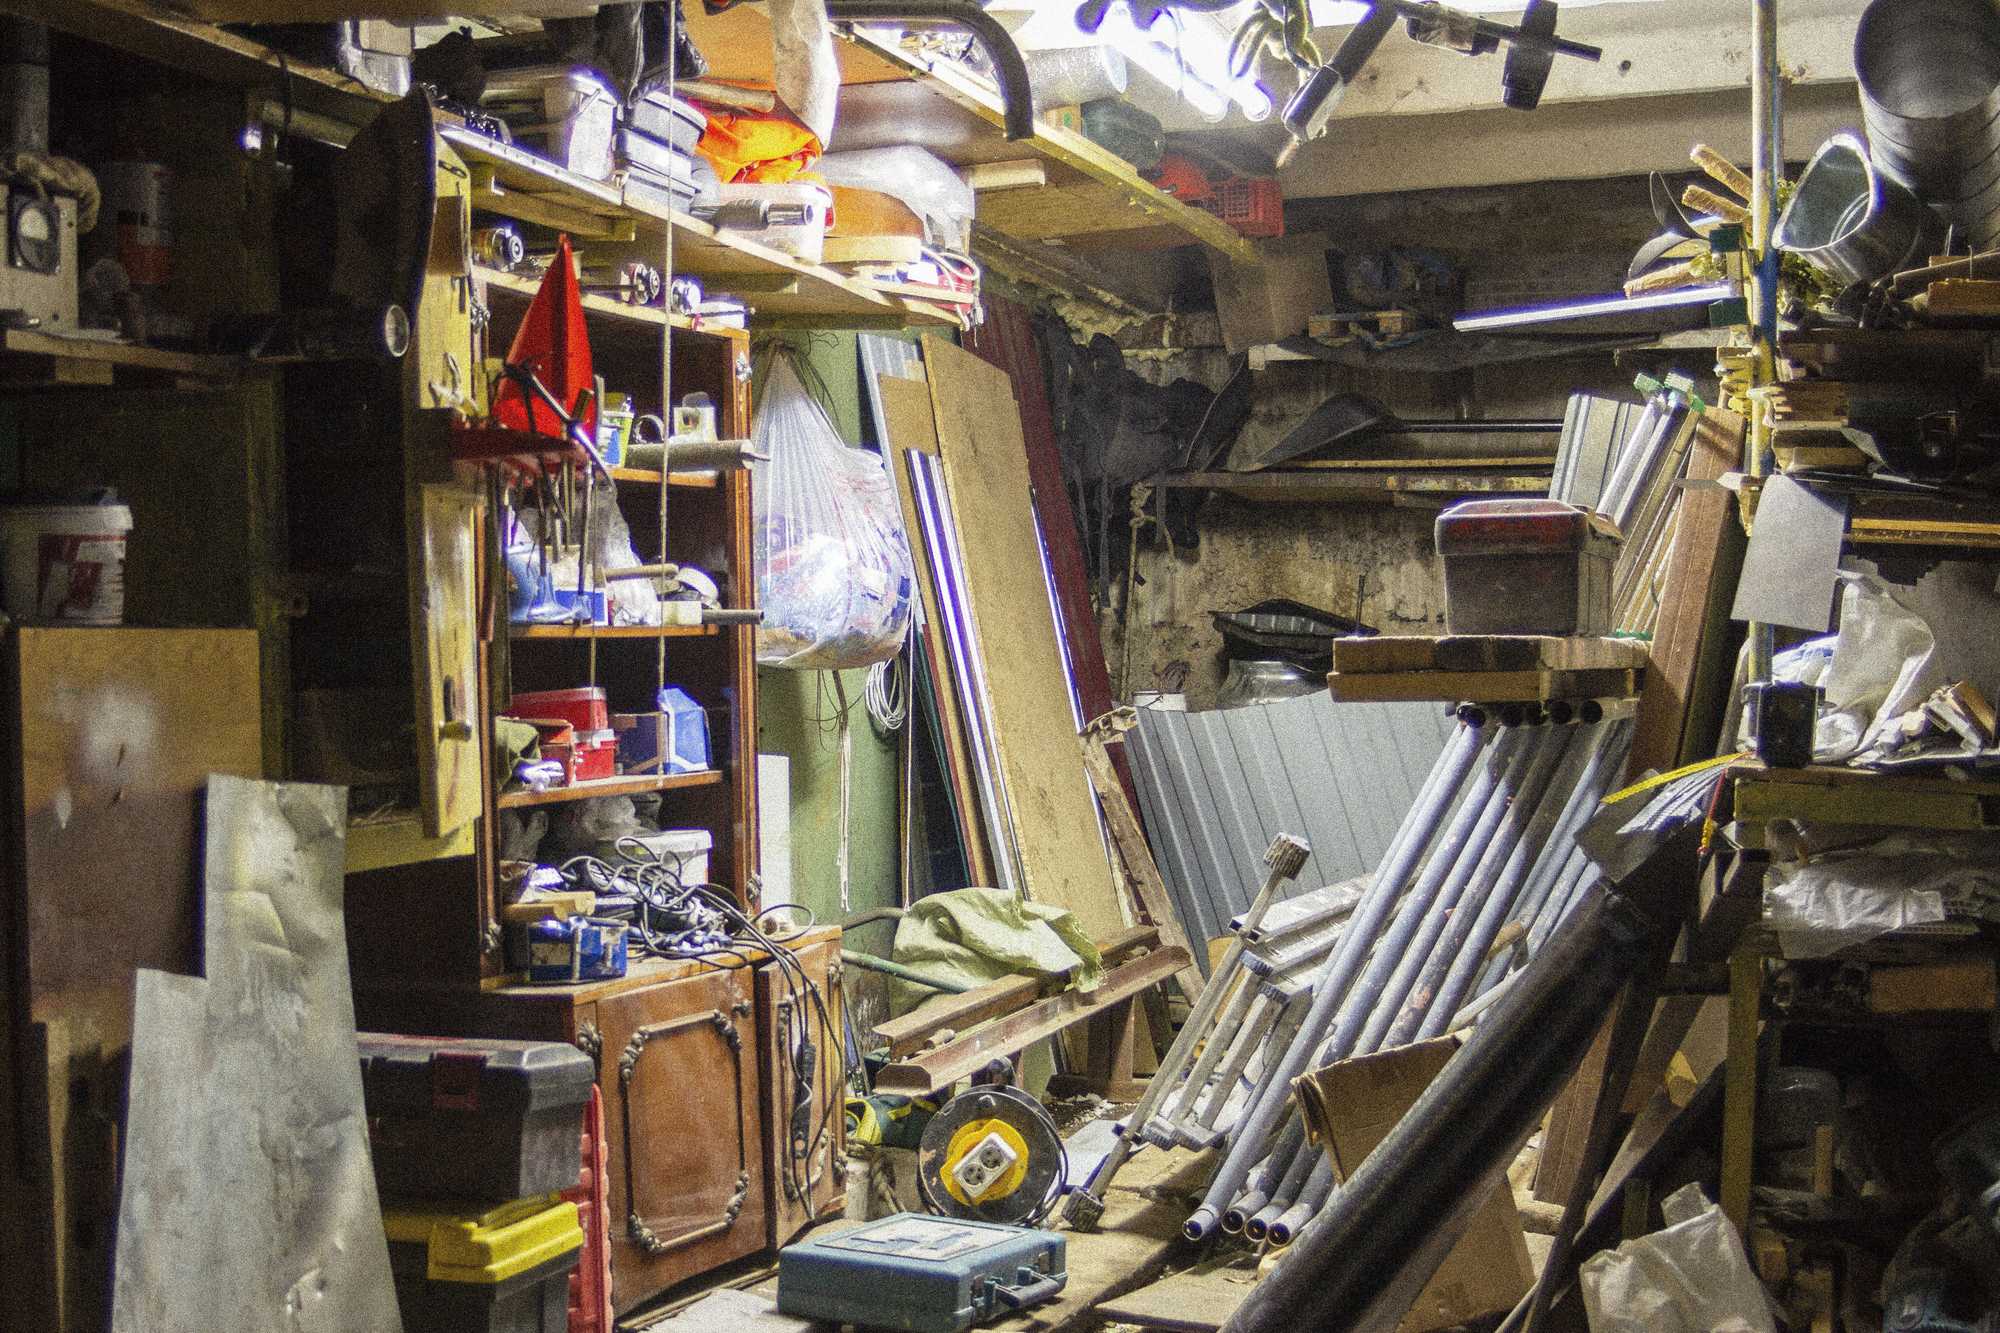 Hoarder Clean-up in Dodge County, WI